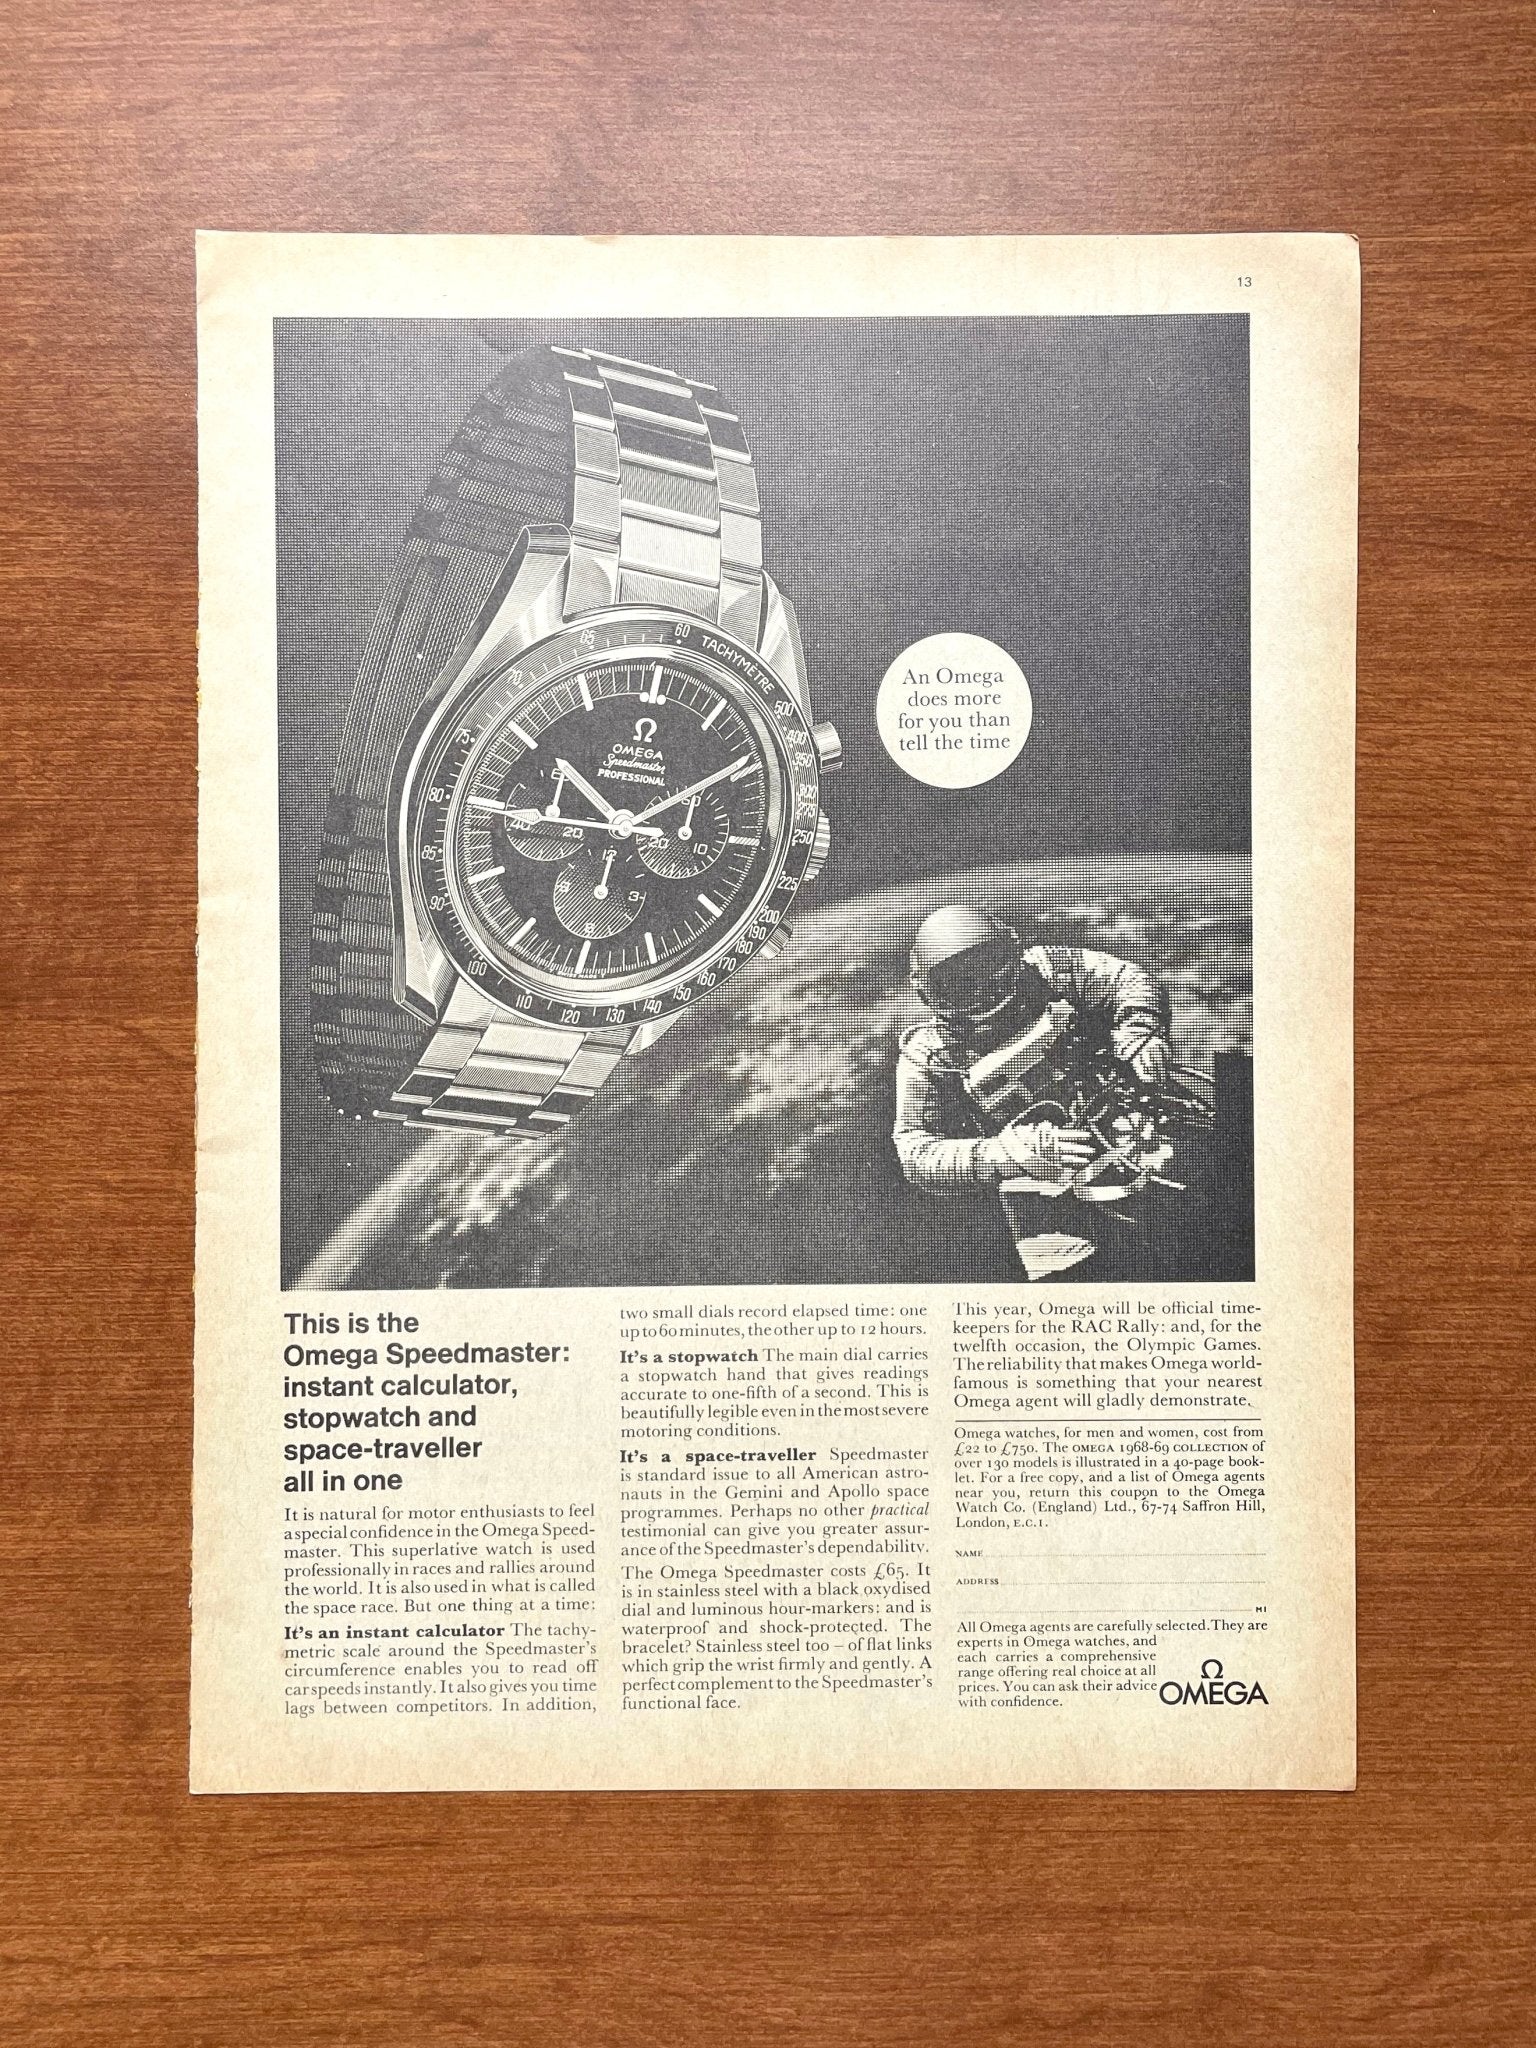 1968 Omega Speedmaster "does more for you than tell the time" Advertisement